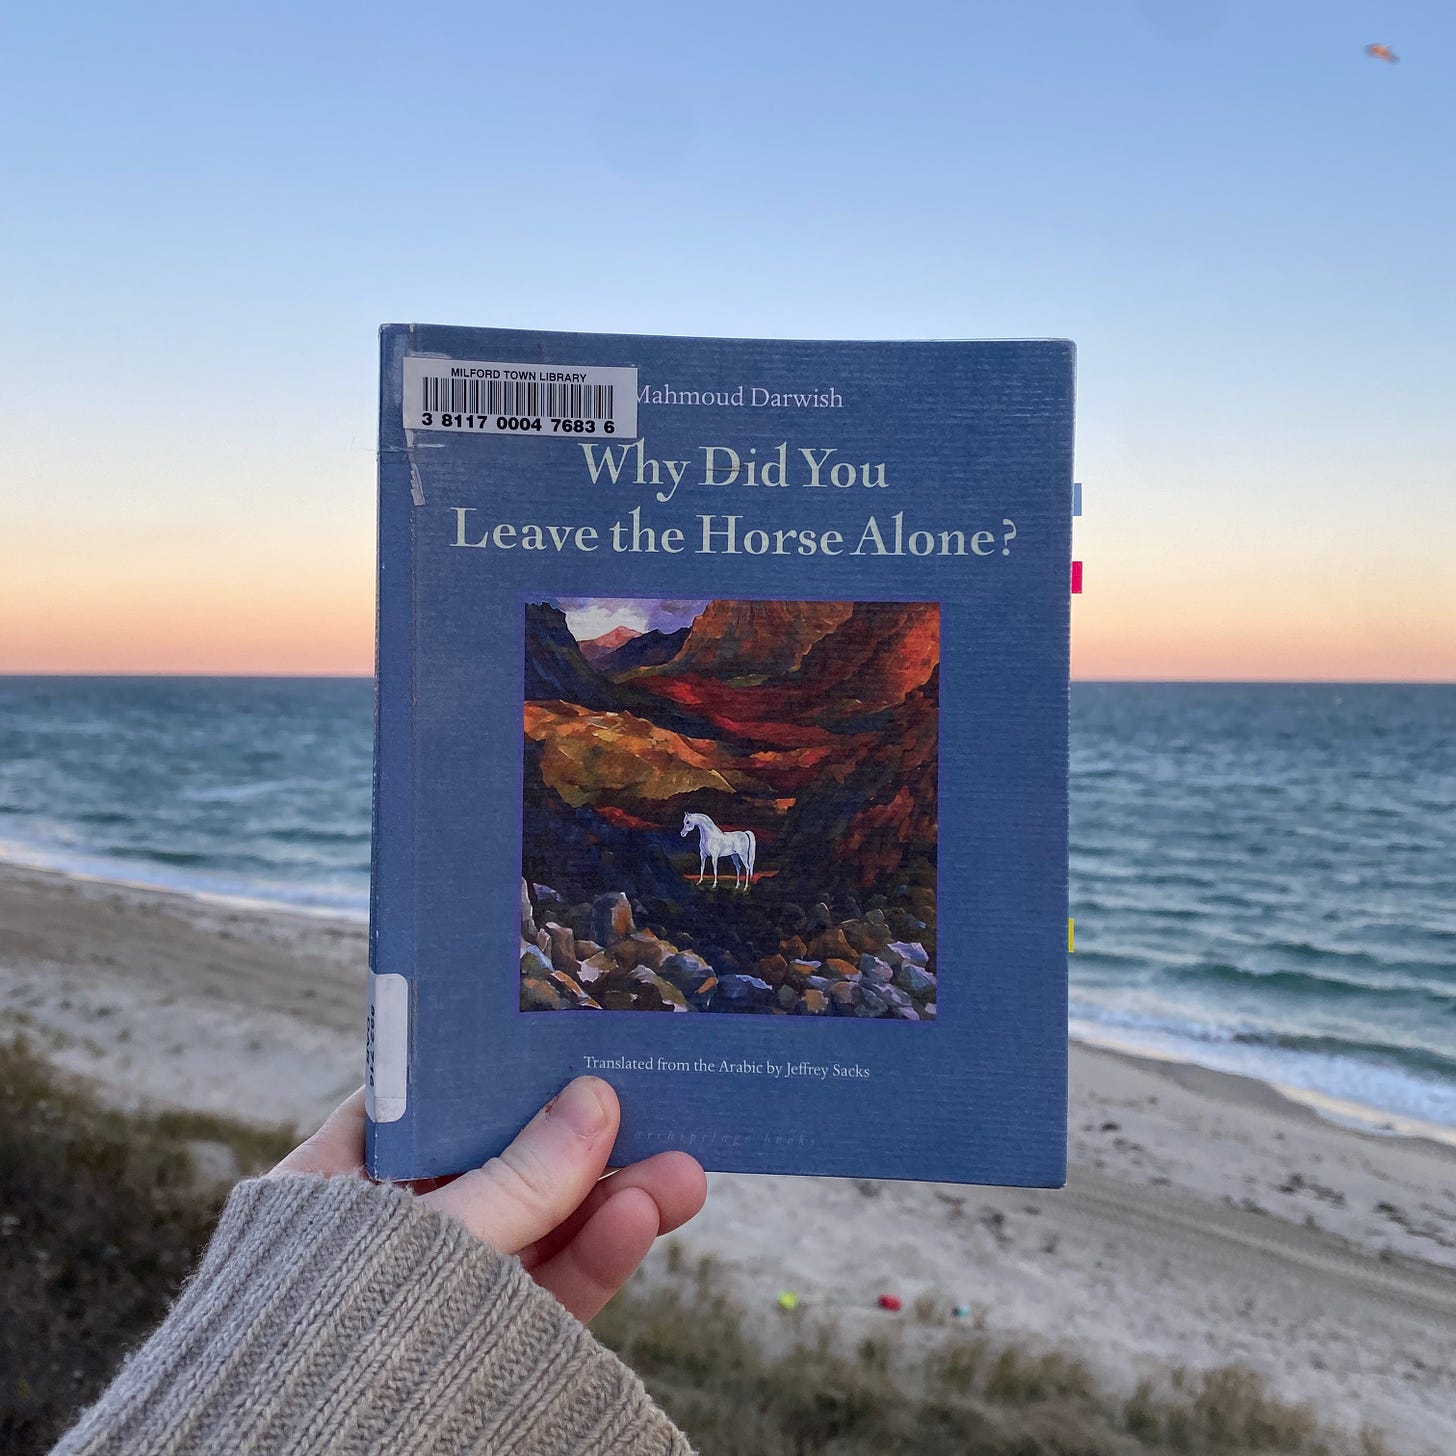 I’m holding this book up in front of the ocean at sunrise.